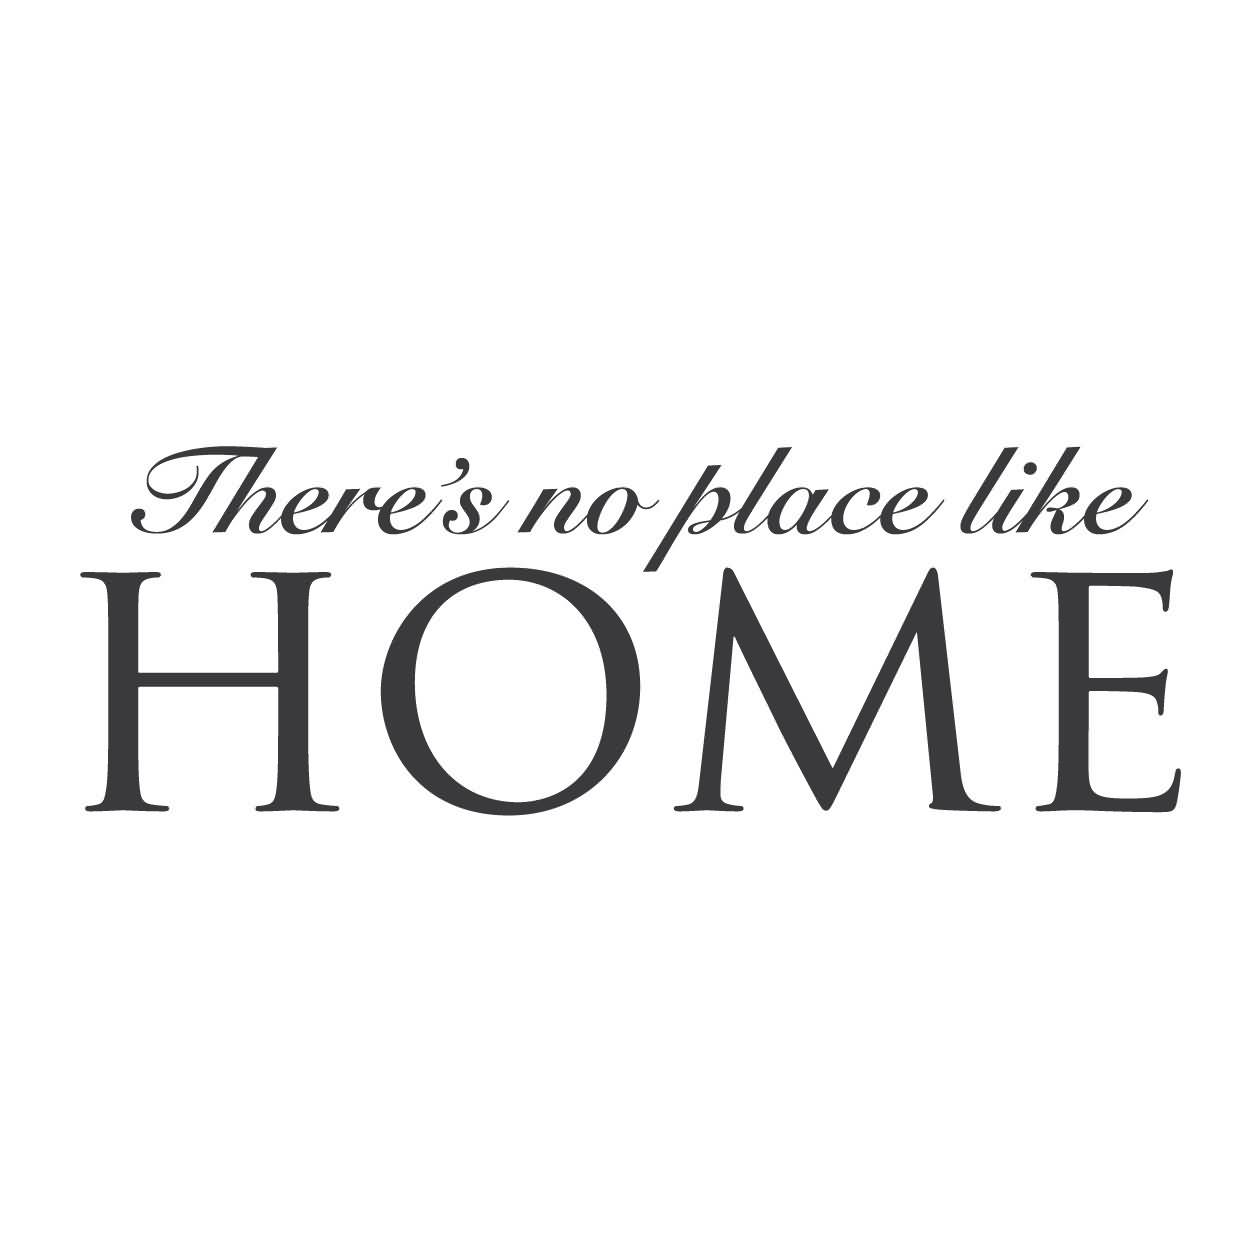 There’s No Place Like Home.